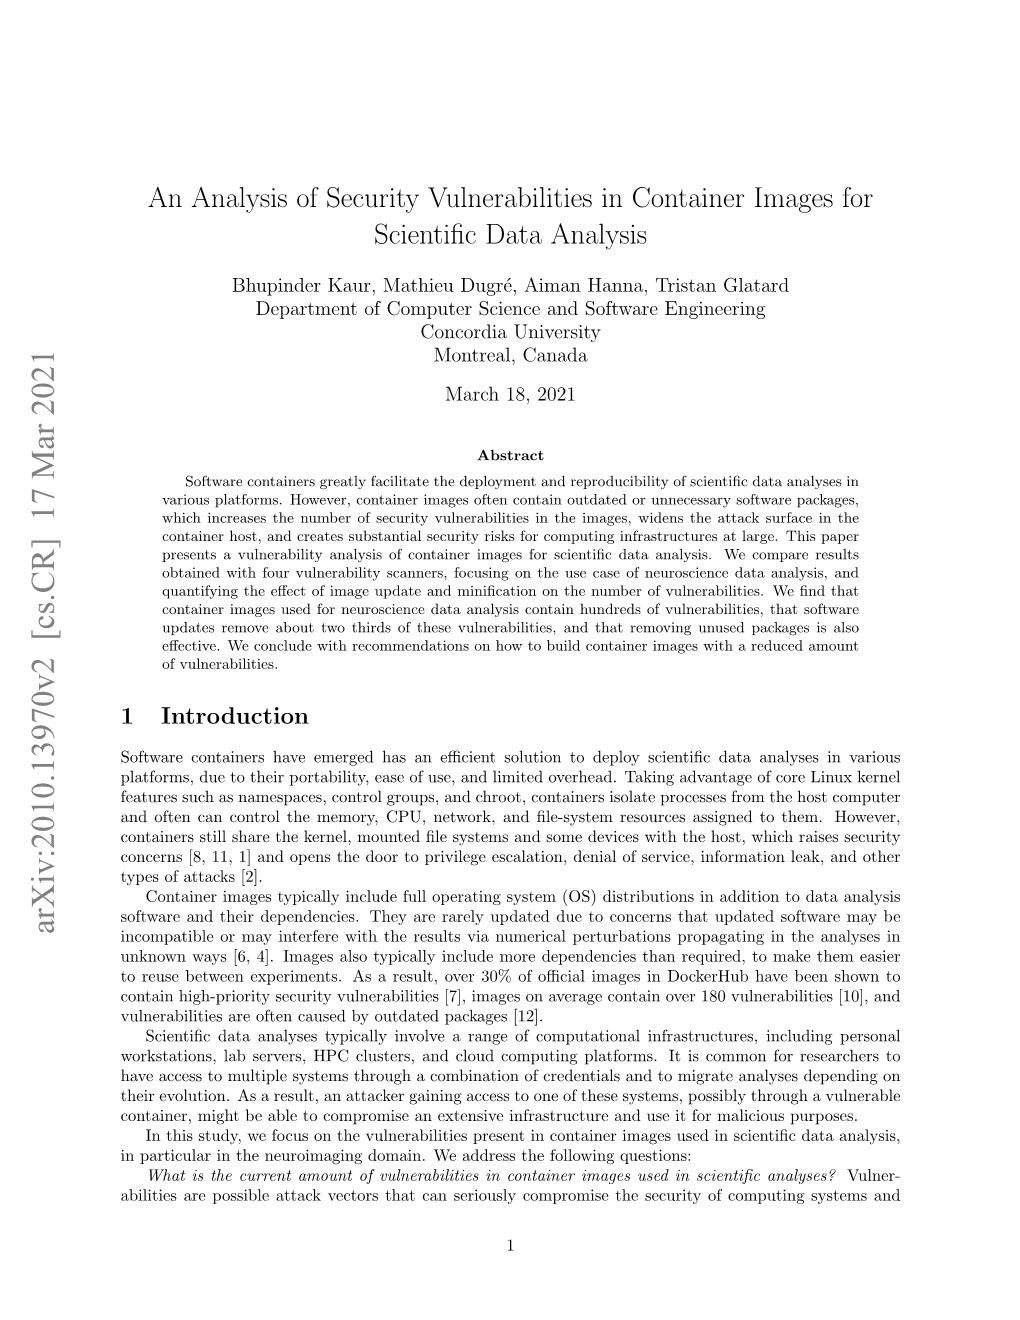 An Analysis of Security Vulnerabilities in Container Images for Scientific